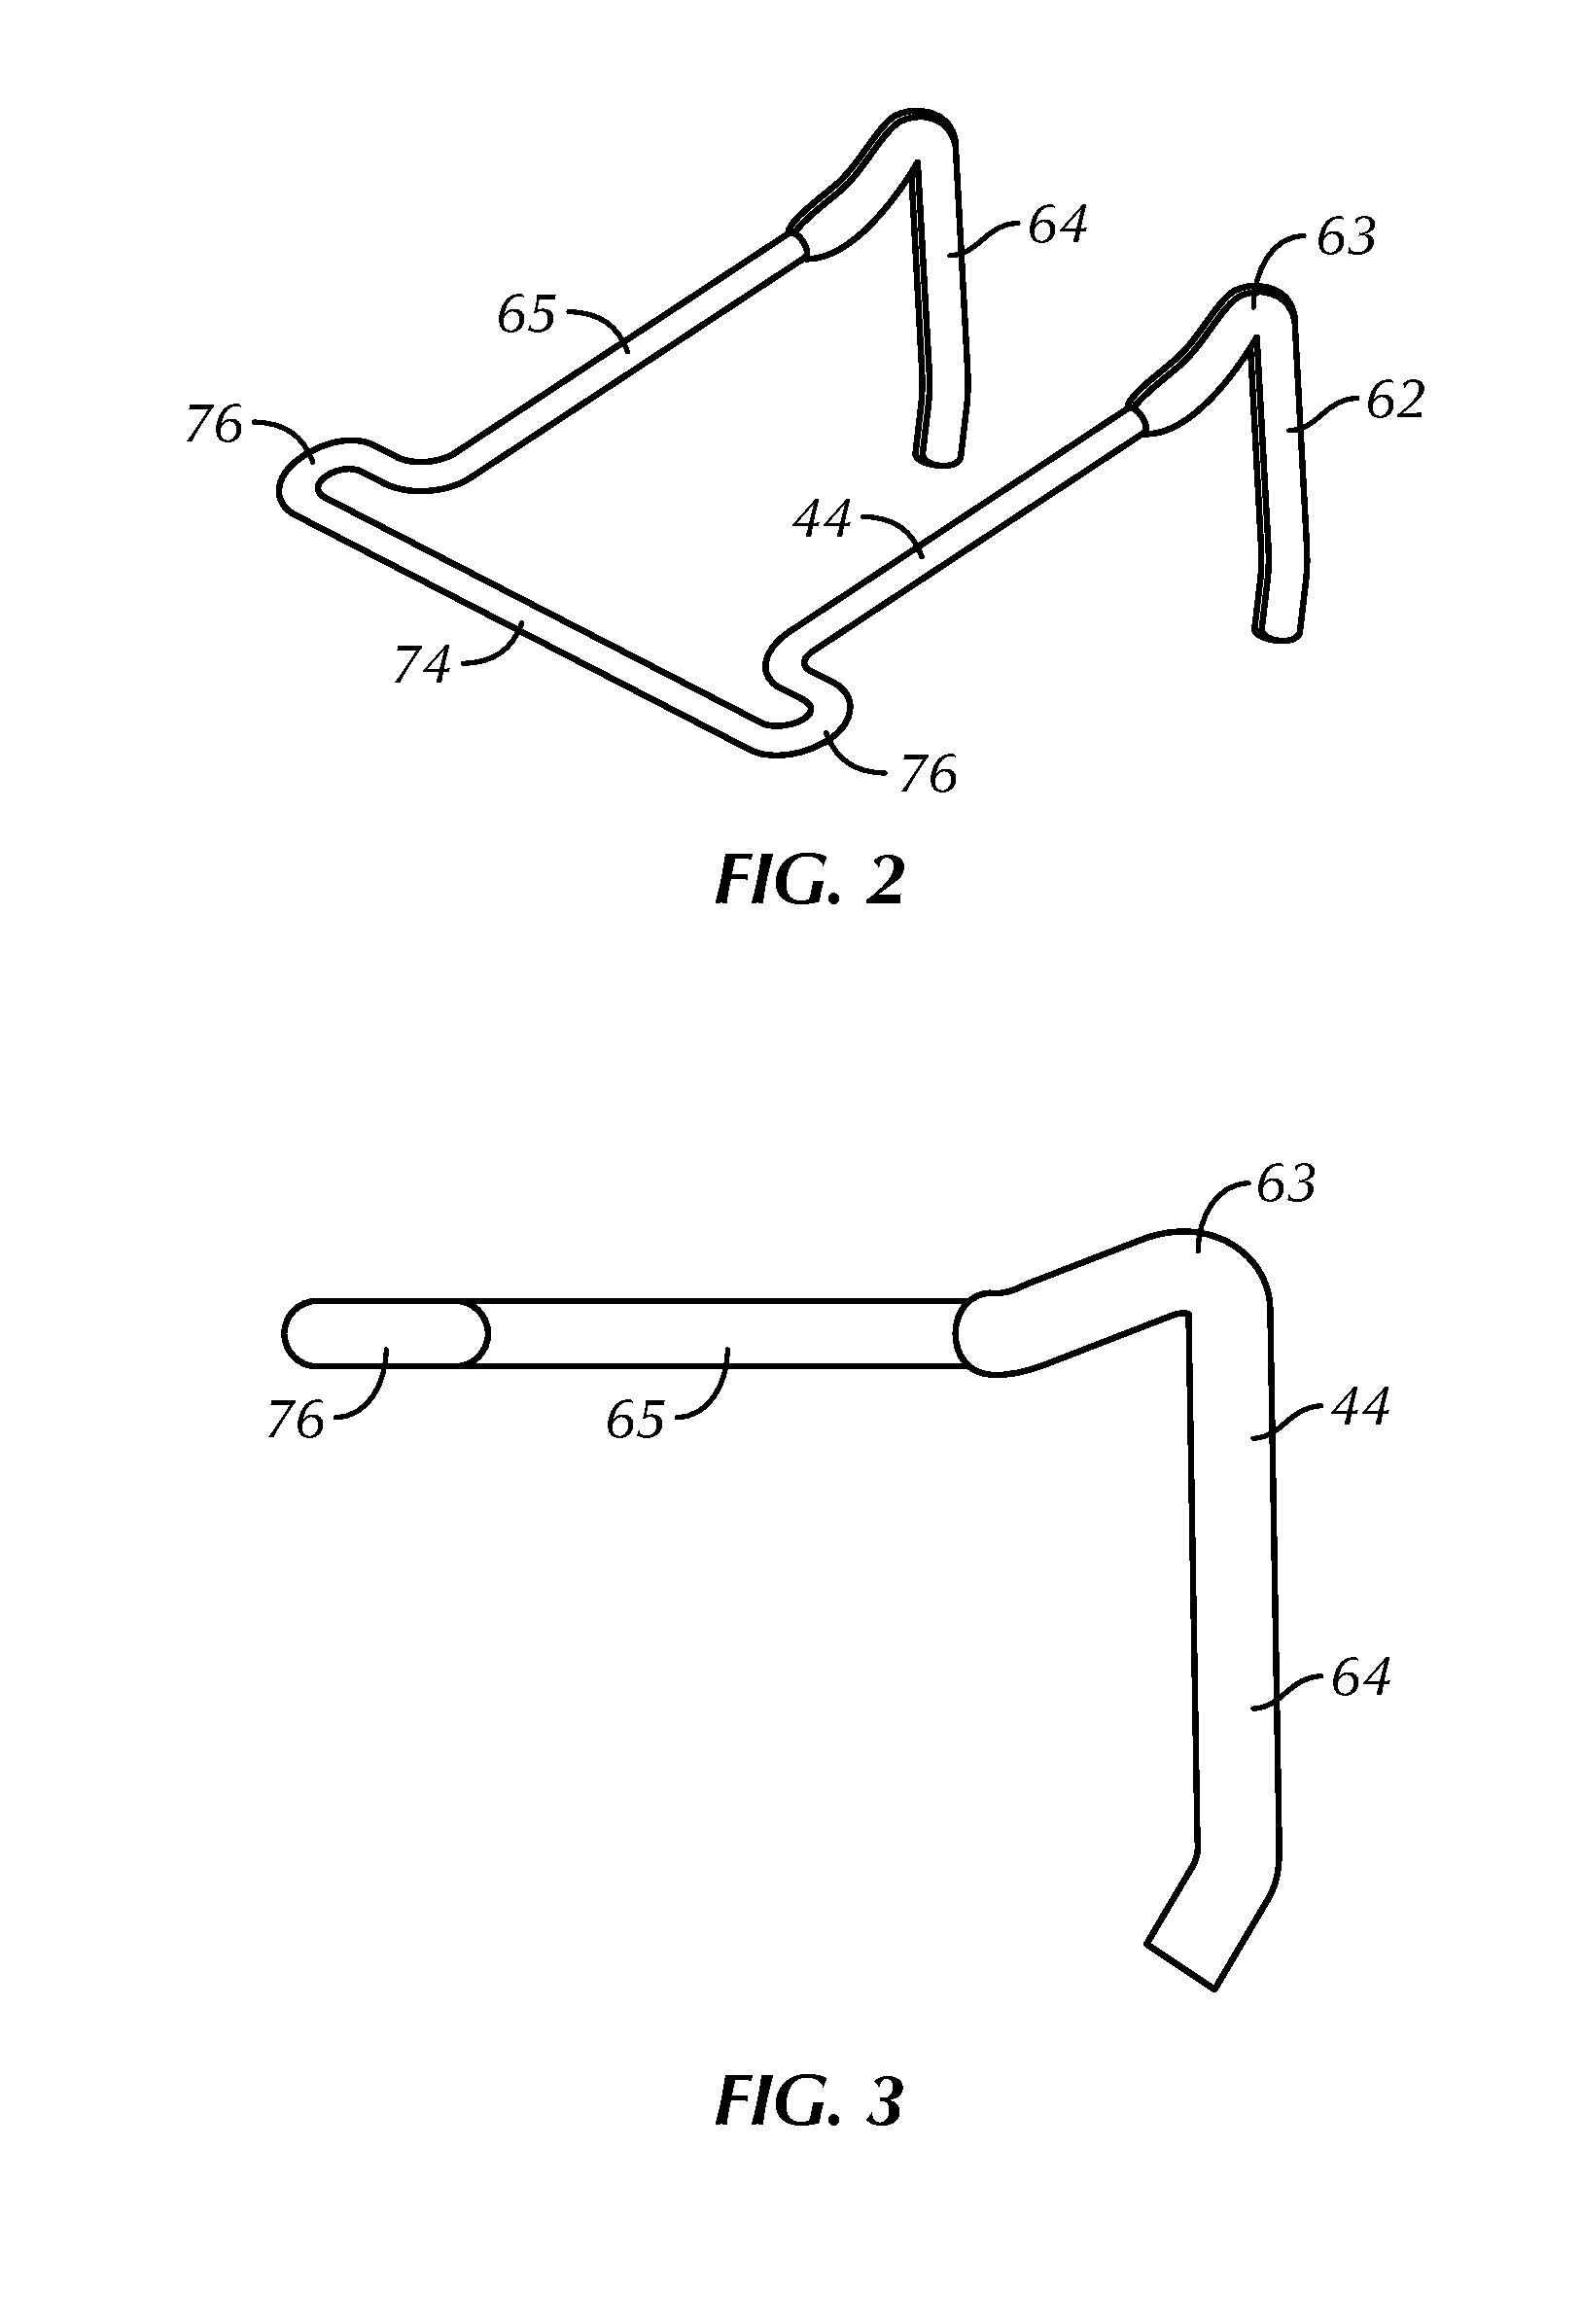 Dual pintle and anchoring system utilizing the same